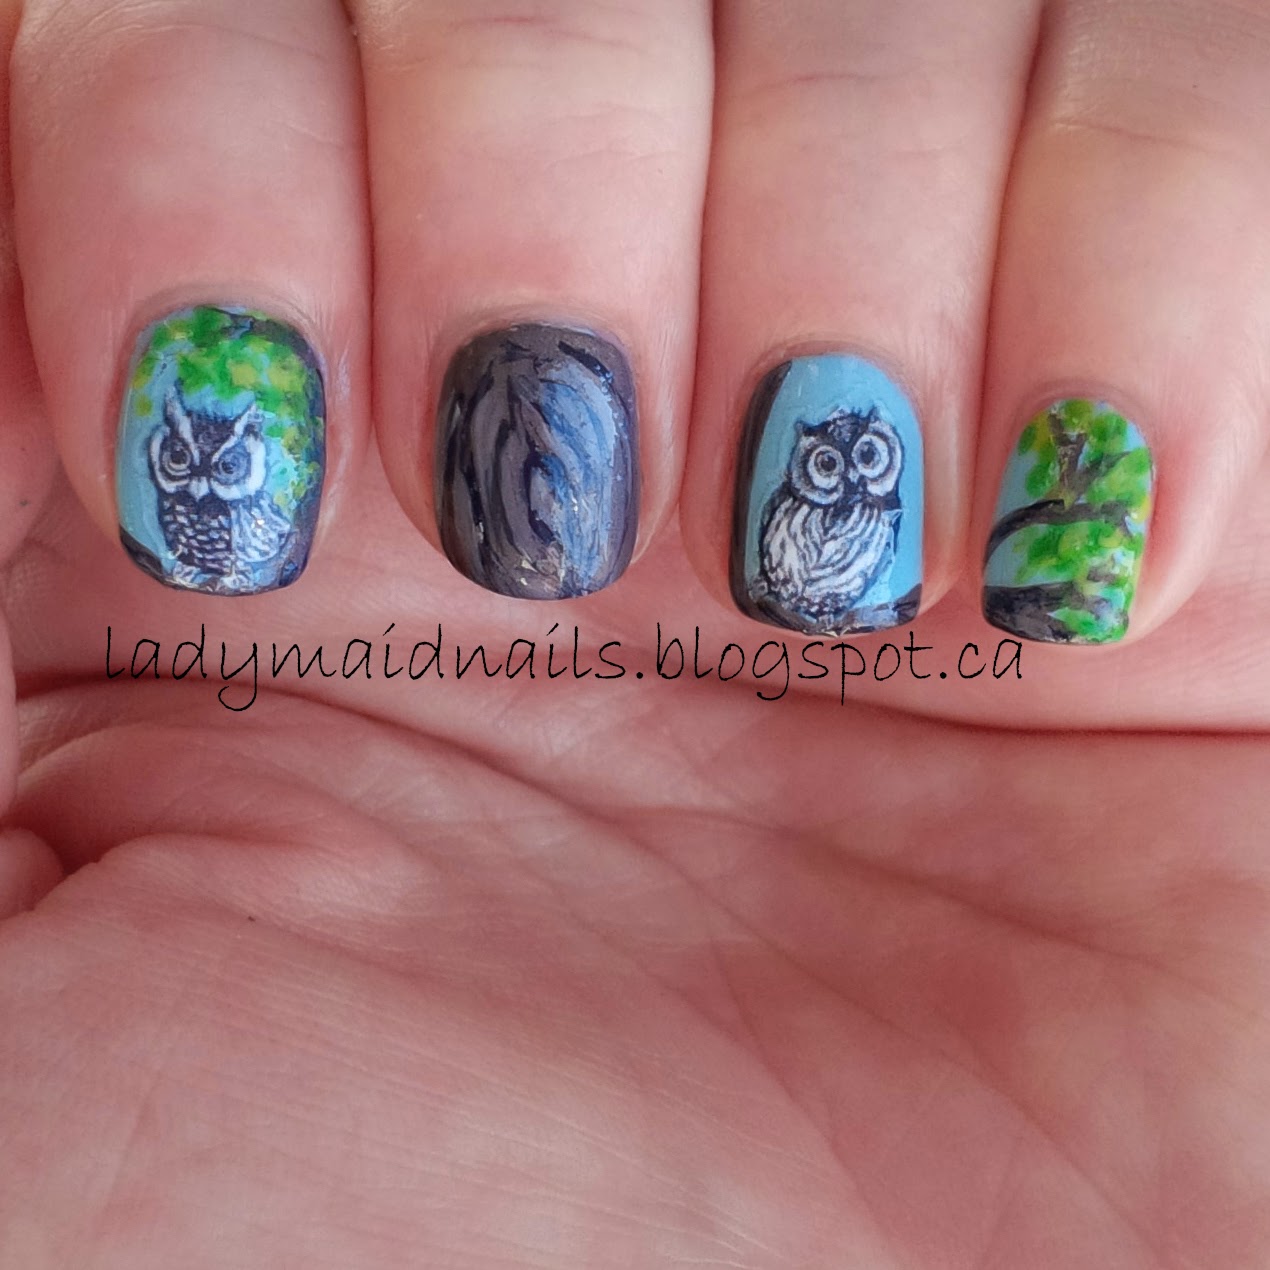 Lady Maid Nails: Green Goddess Creations, Owl Decals